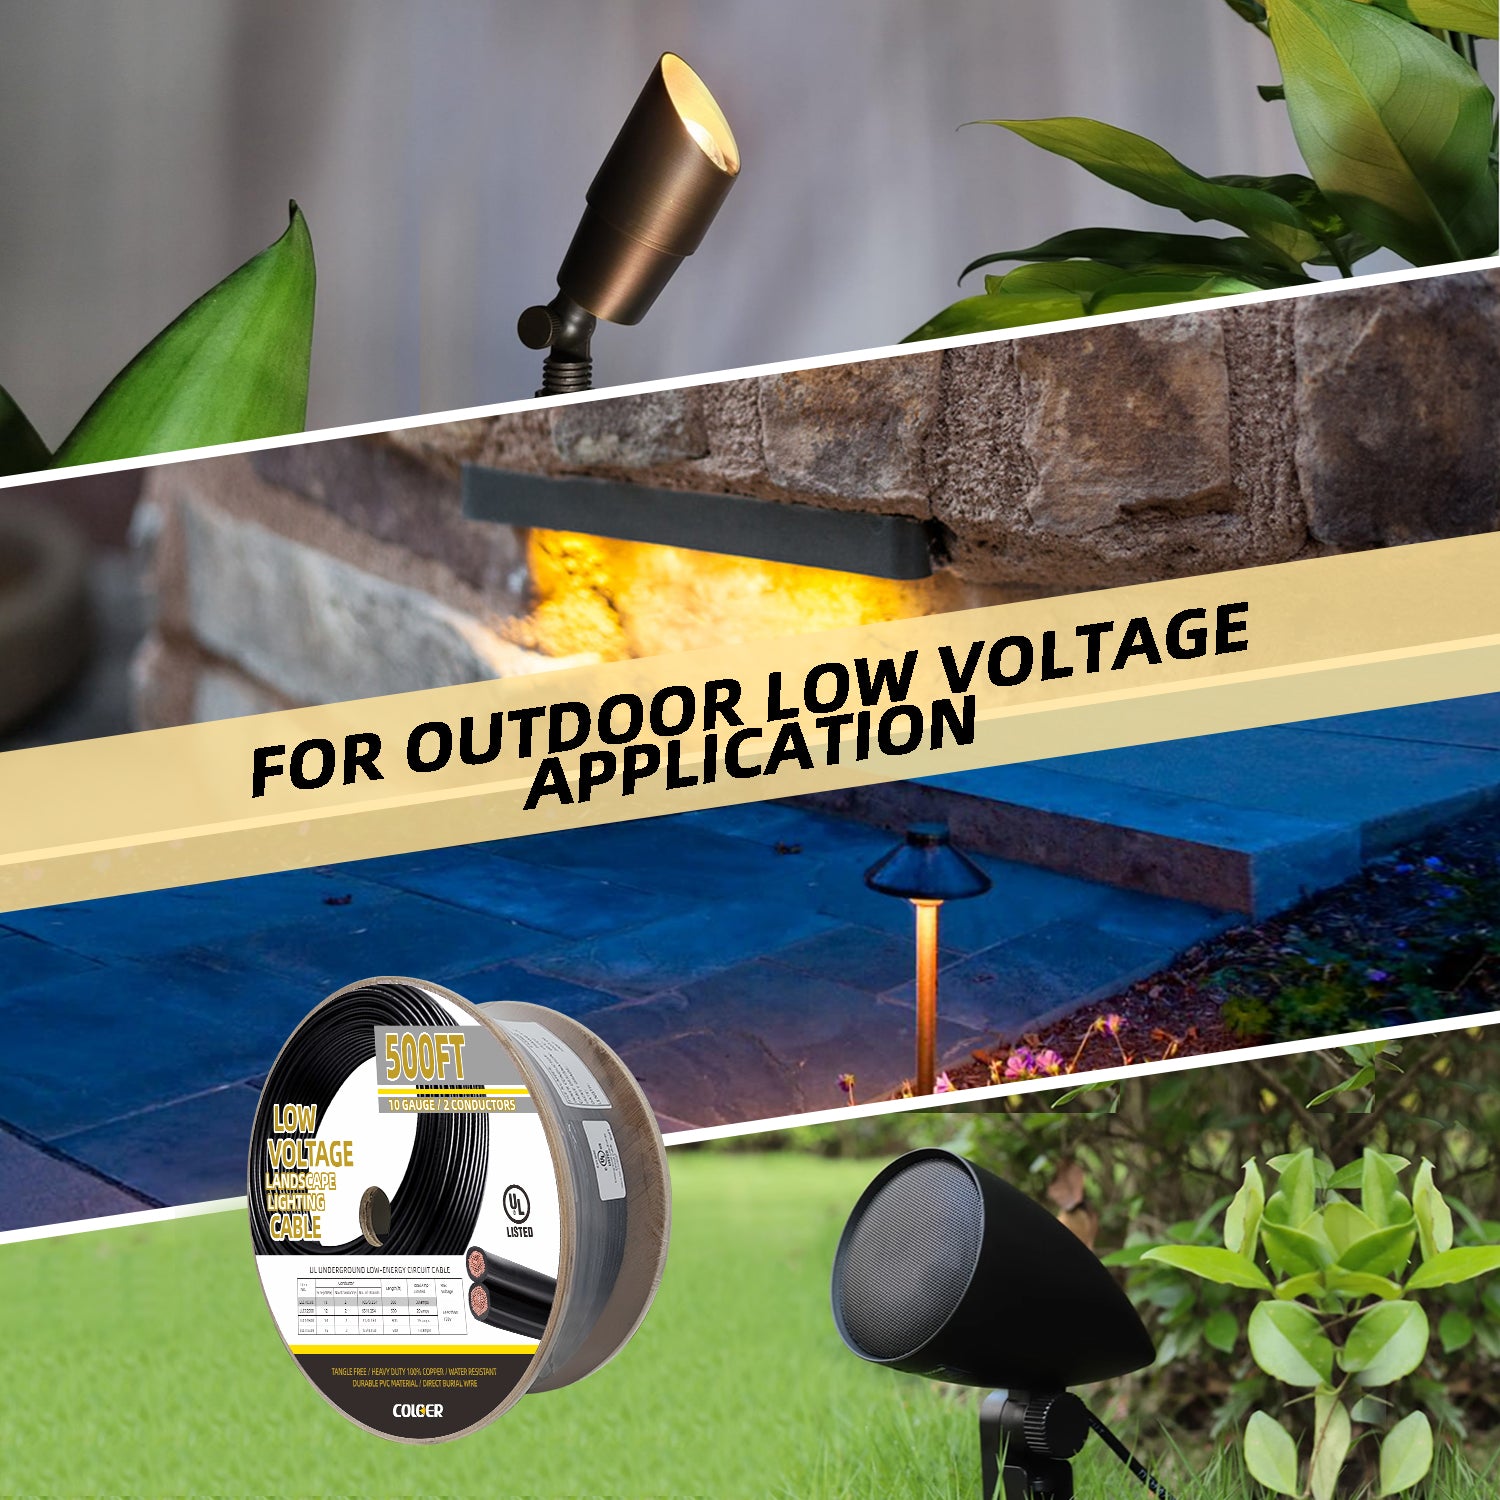 Collage showing applications of 16 Gauge Low Voltage Pure Copper Landscape Wire, including spot lights, hardscape lights, and path lights. Text reads 'FOR OUTDOOR LOW VOLTAGE APPLICATION'.